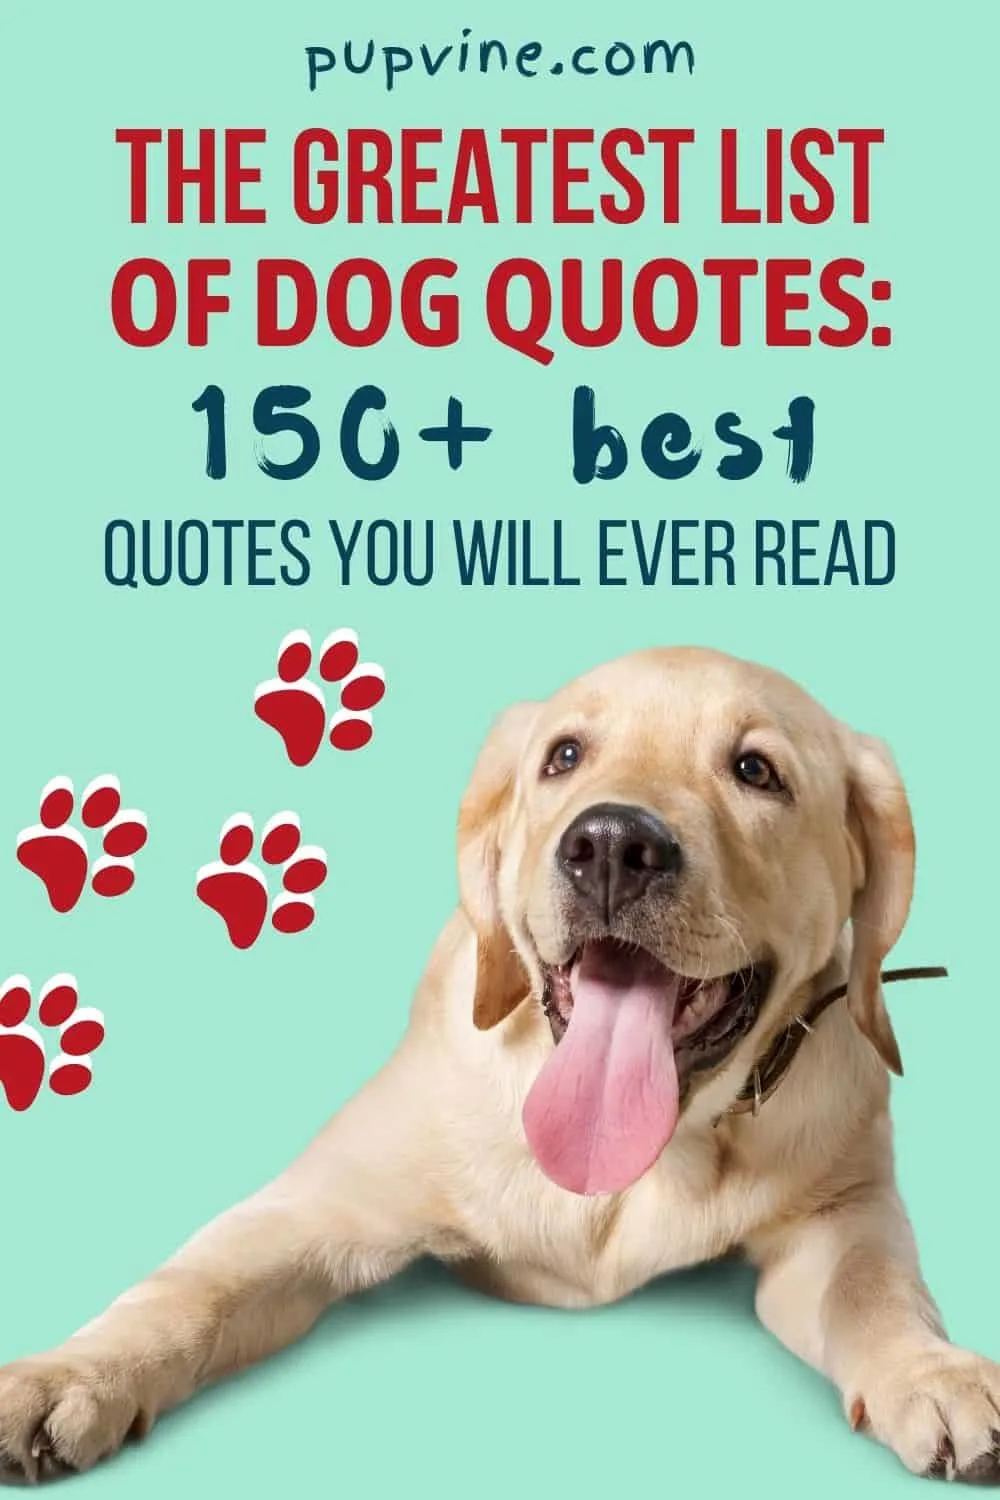 The Greatest List Of Dog Quotes: 150+ Best Quotes You Will Ever Read